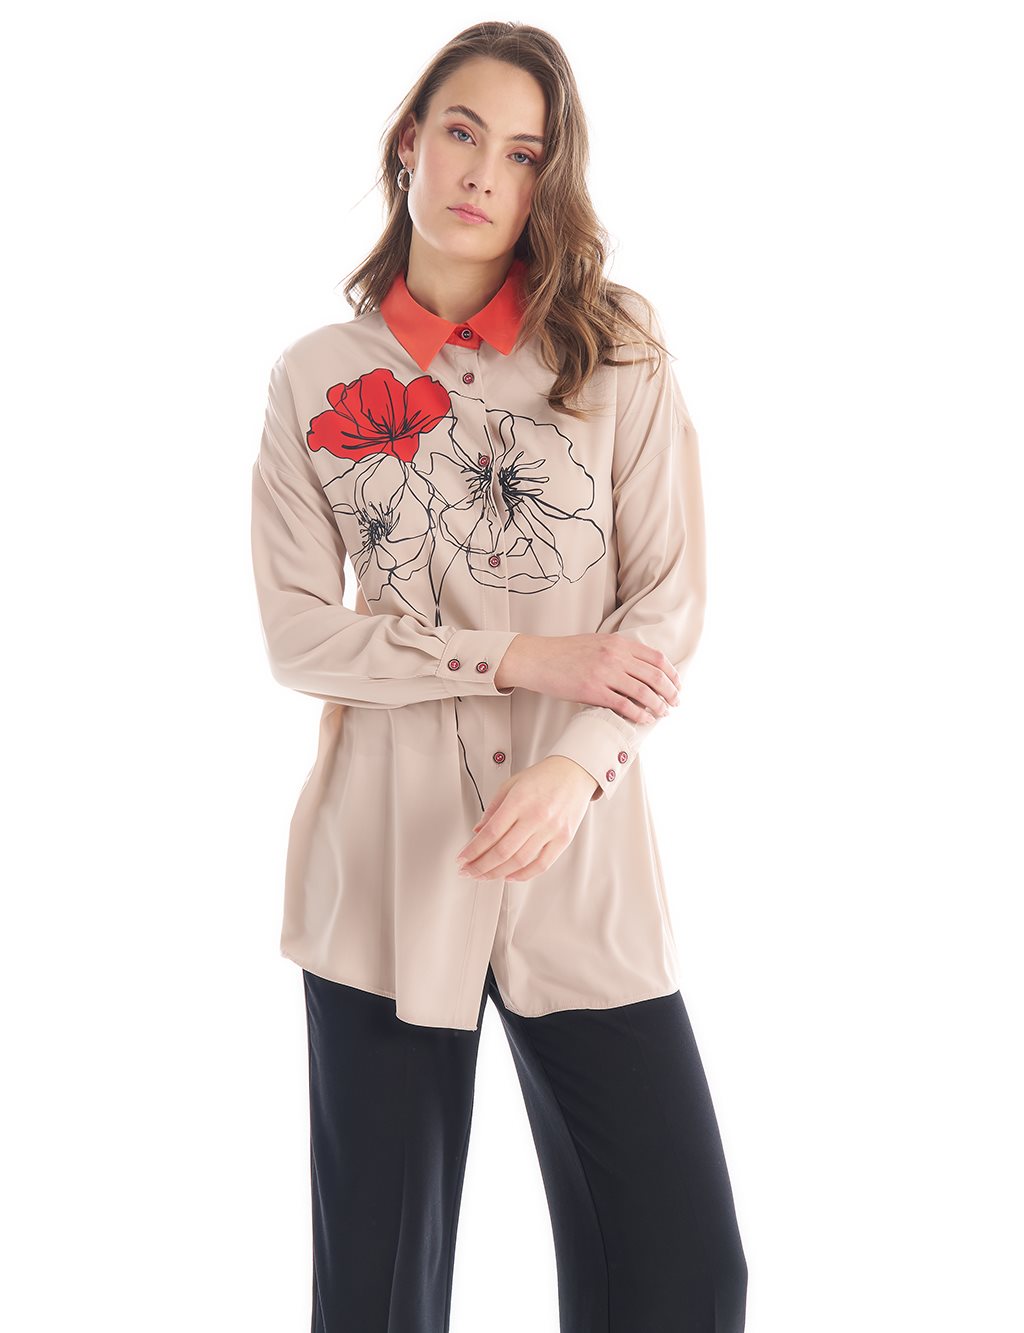 Floral Printed Shirt Collar Blouse Sand Beige